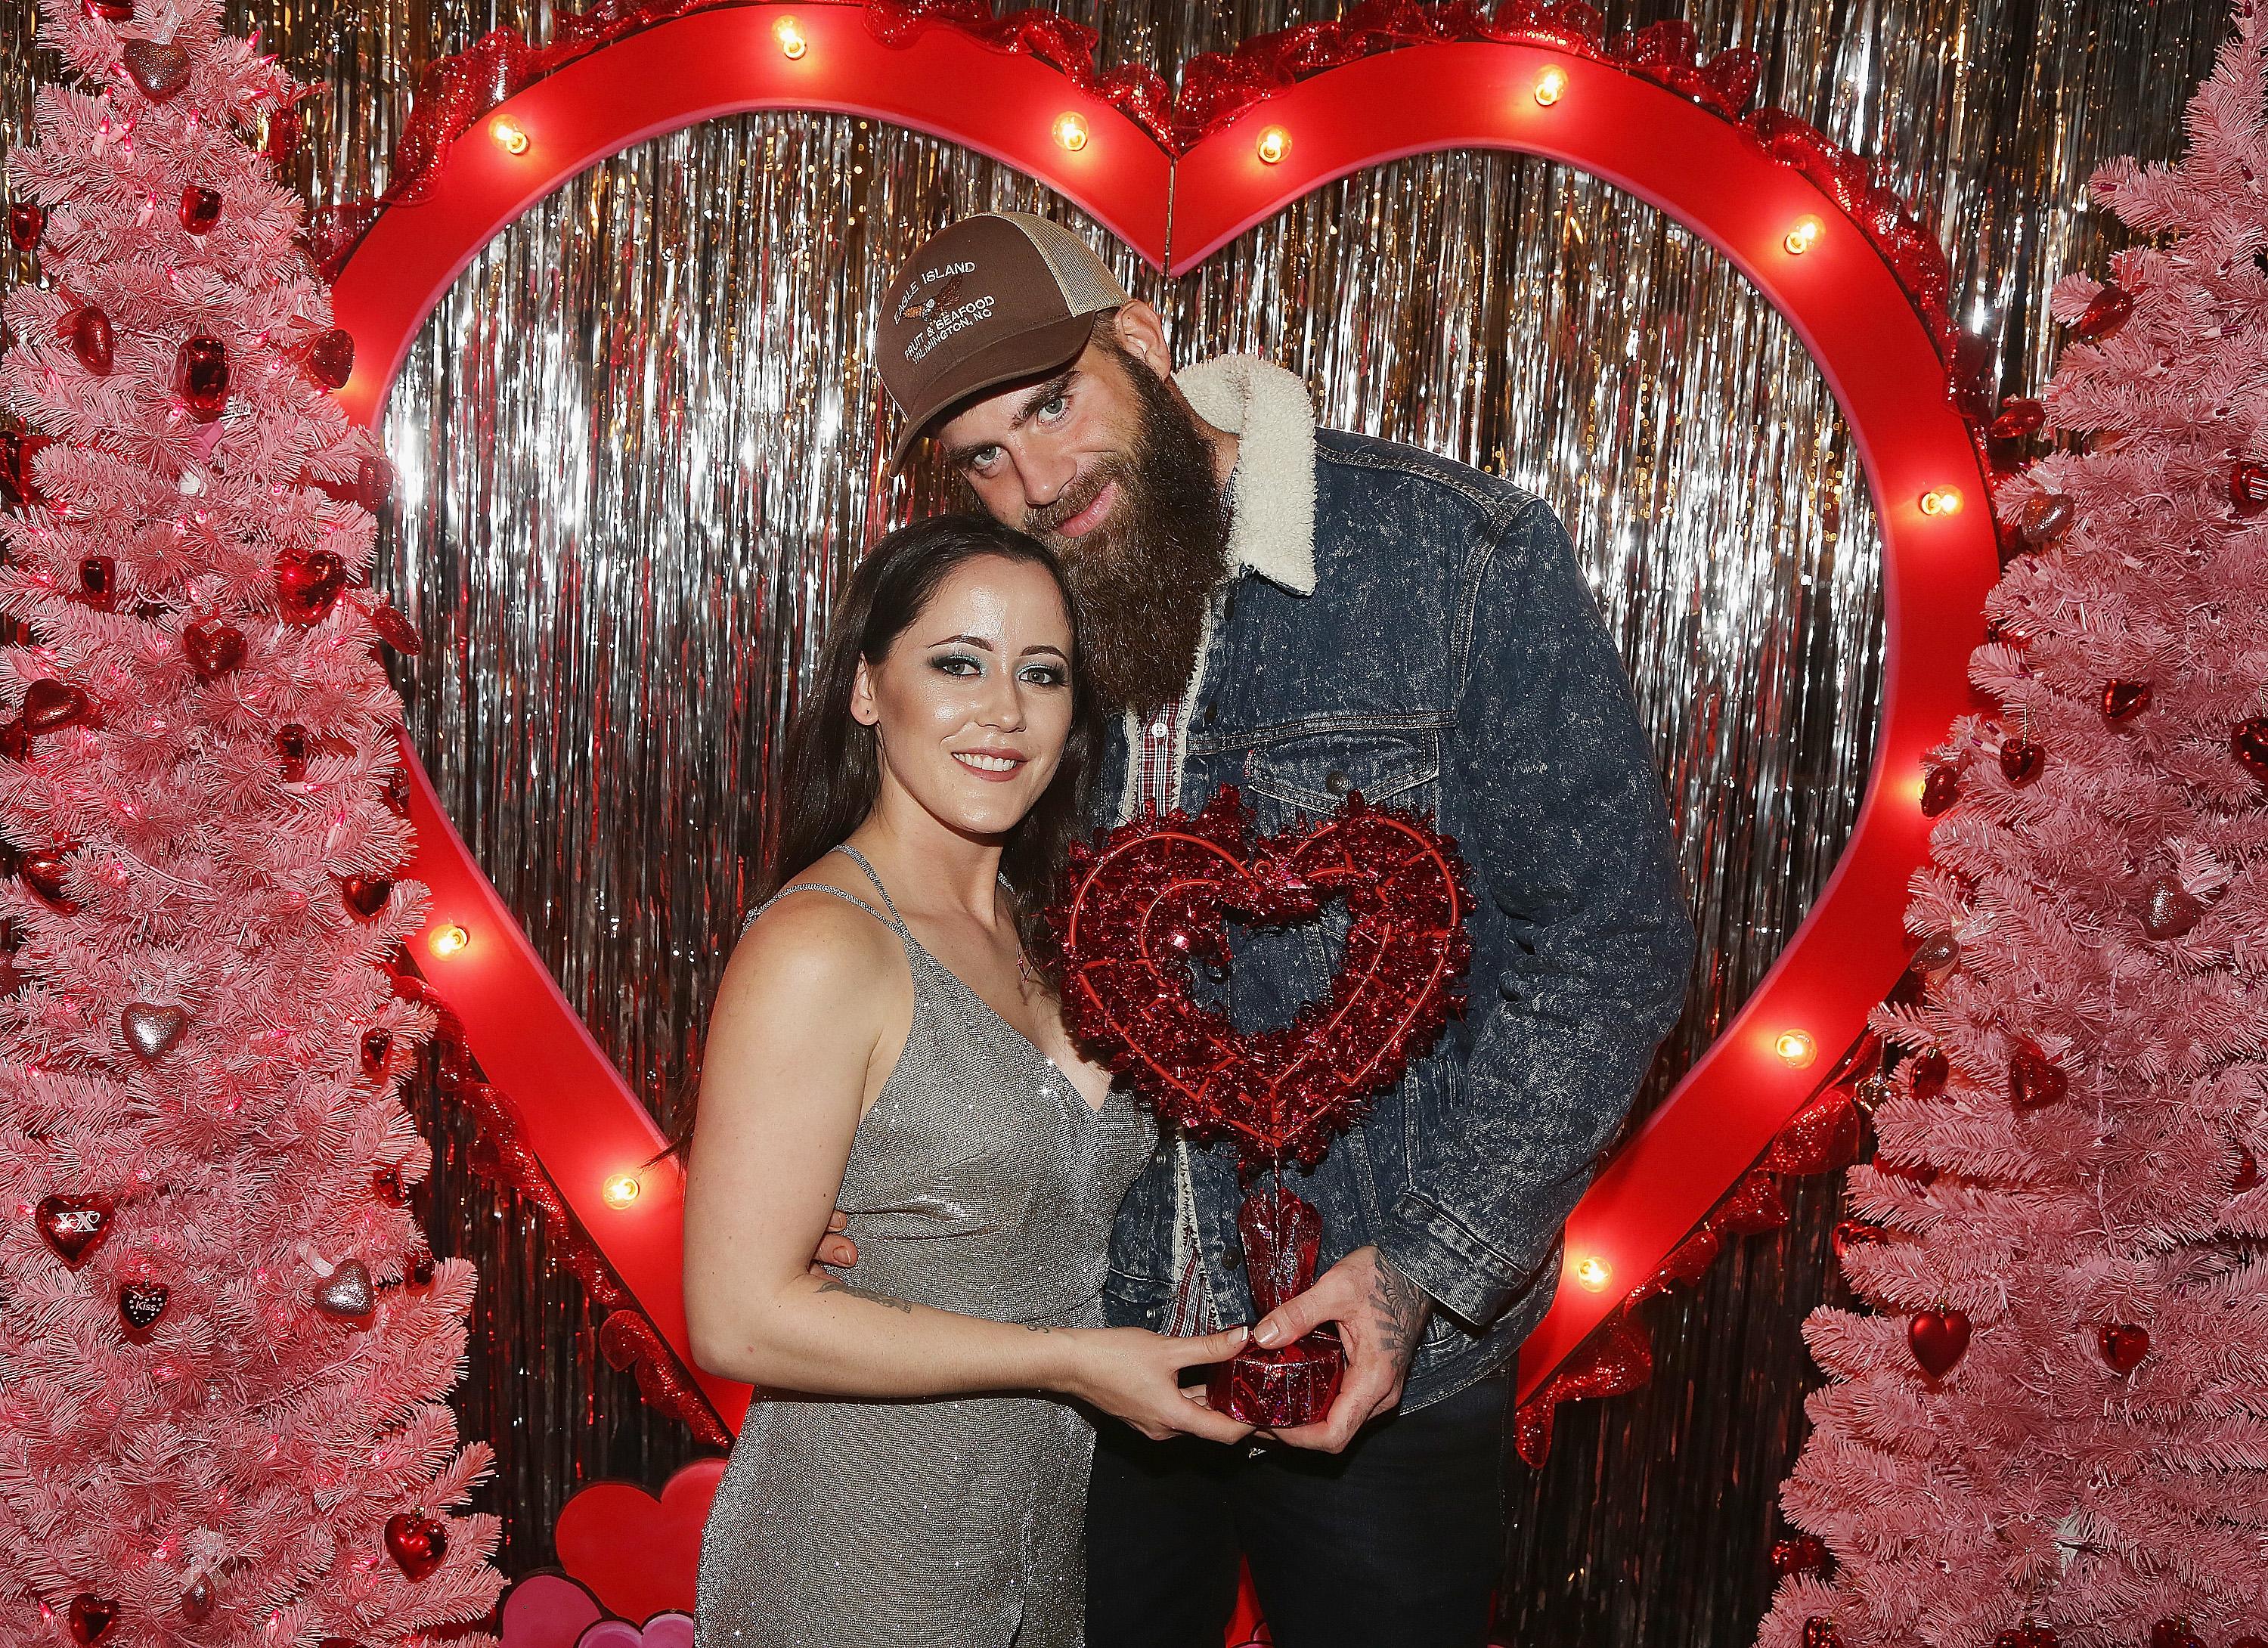 Jenelle Evans and David Eason Have Called It Quits